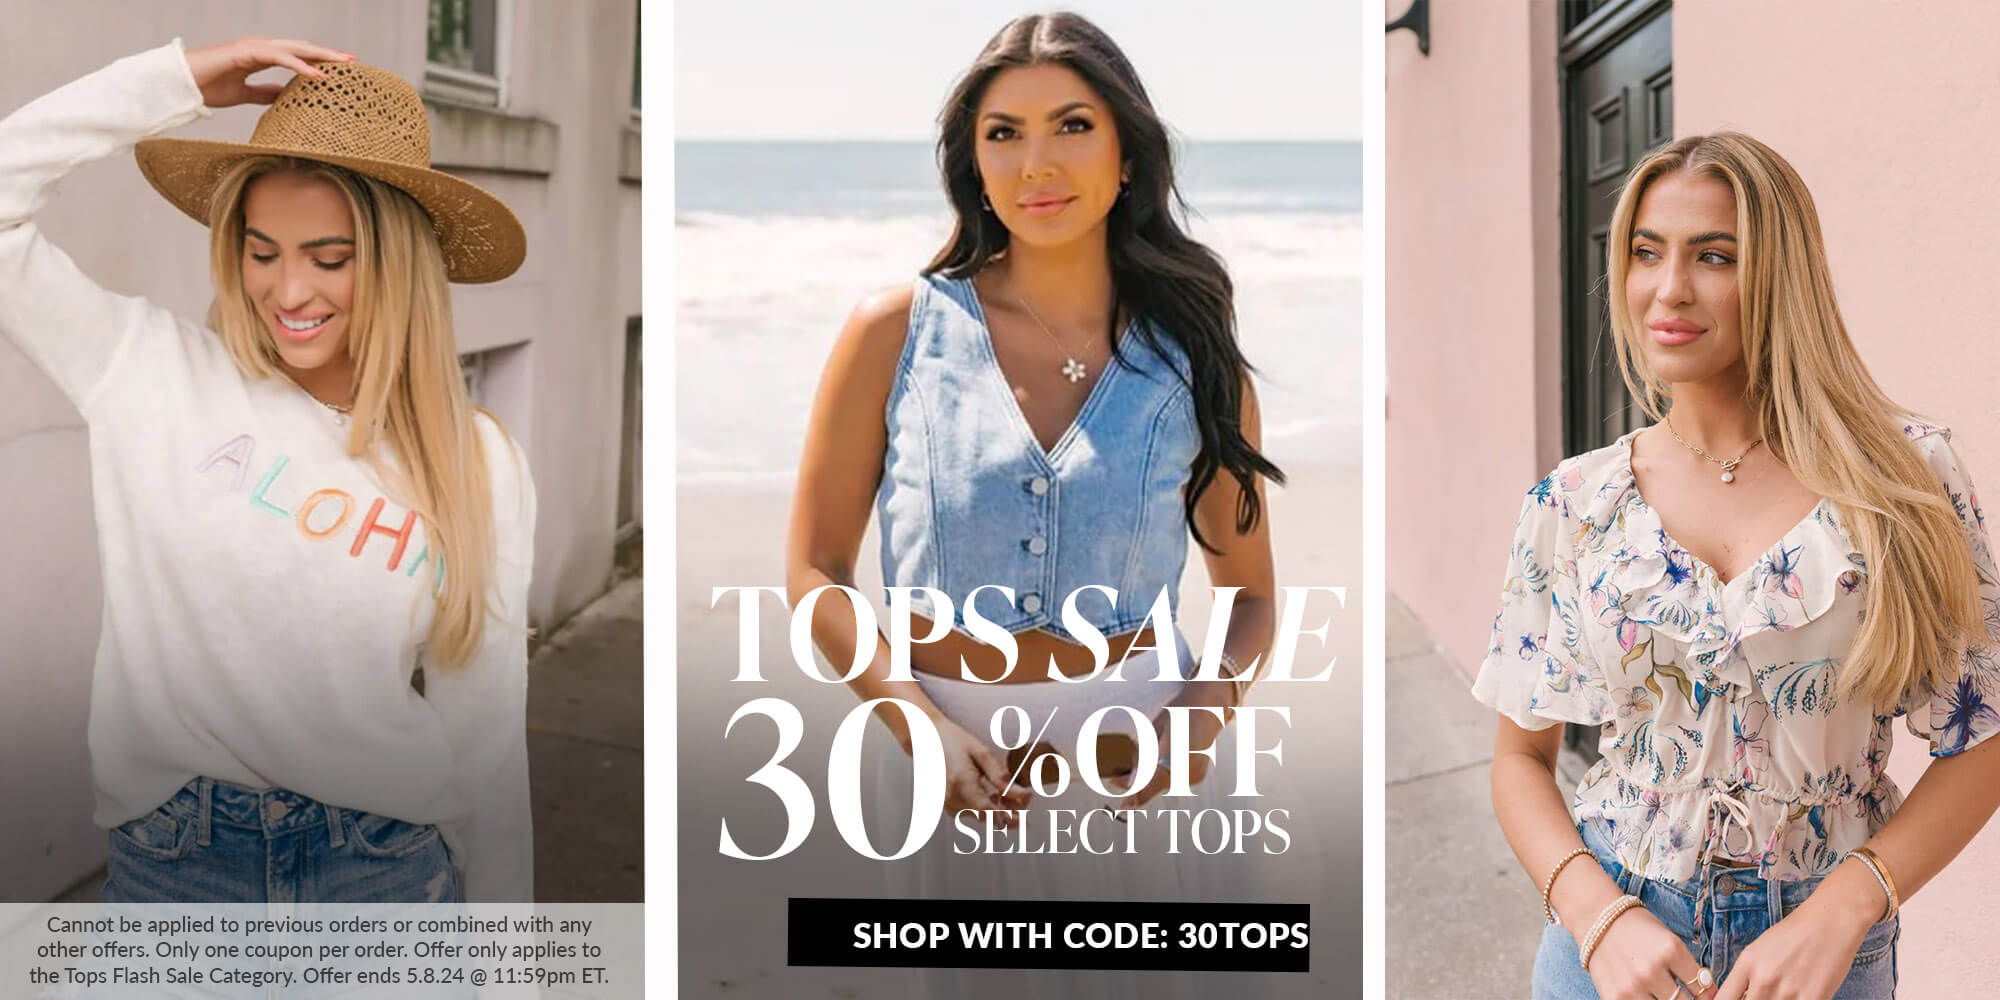 tops sale 30% off select tops shop with code 30TOPS Cannot be applied to previous orders or combined with any other offers. Only one coupon per order. Offer only applies to the Tops Flash Sale Category. Offer ends 5.8.24 @ 11:59pm ET.